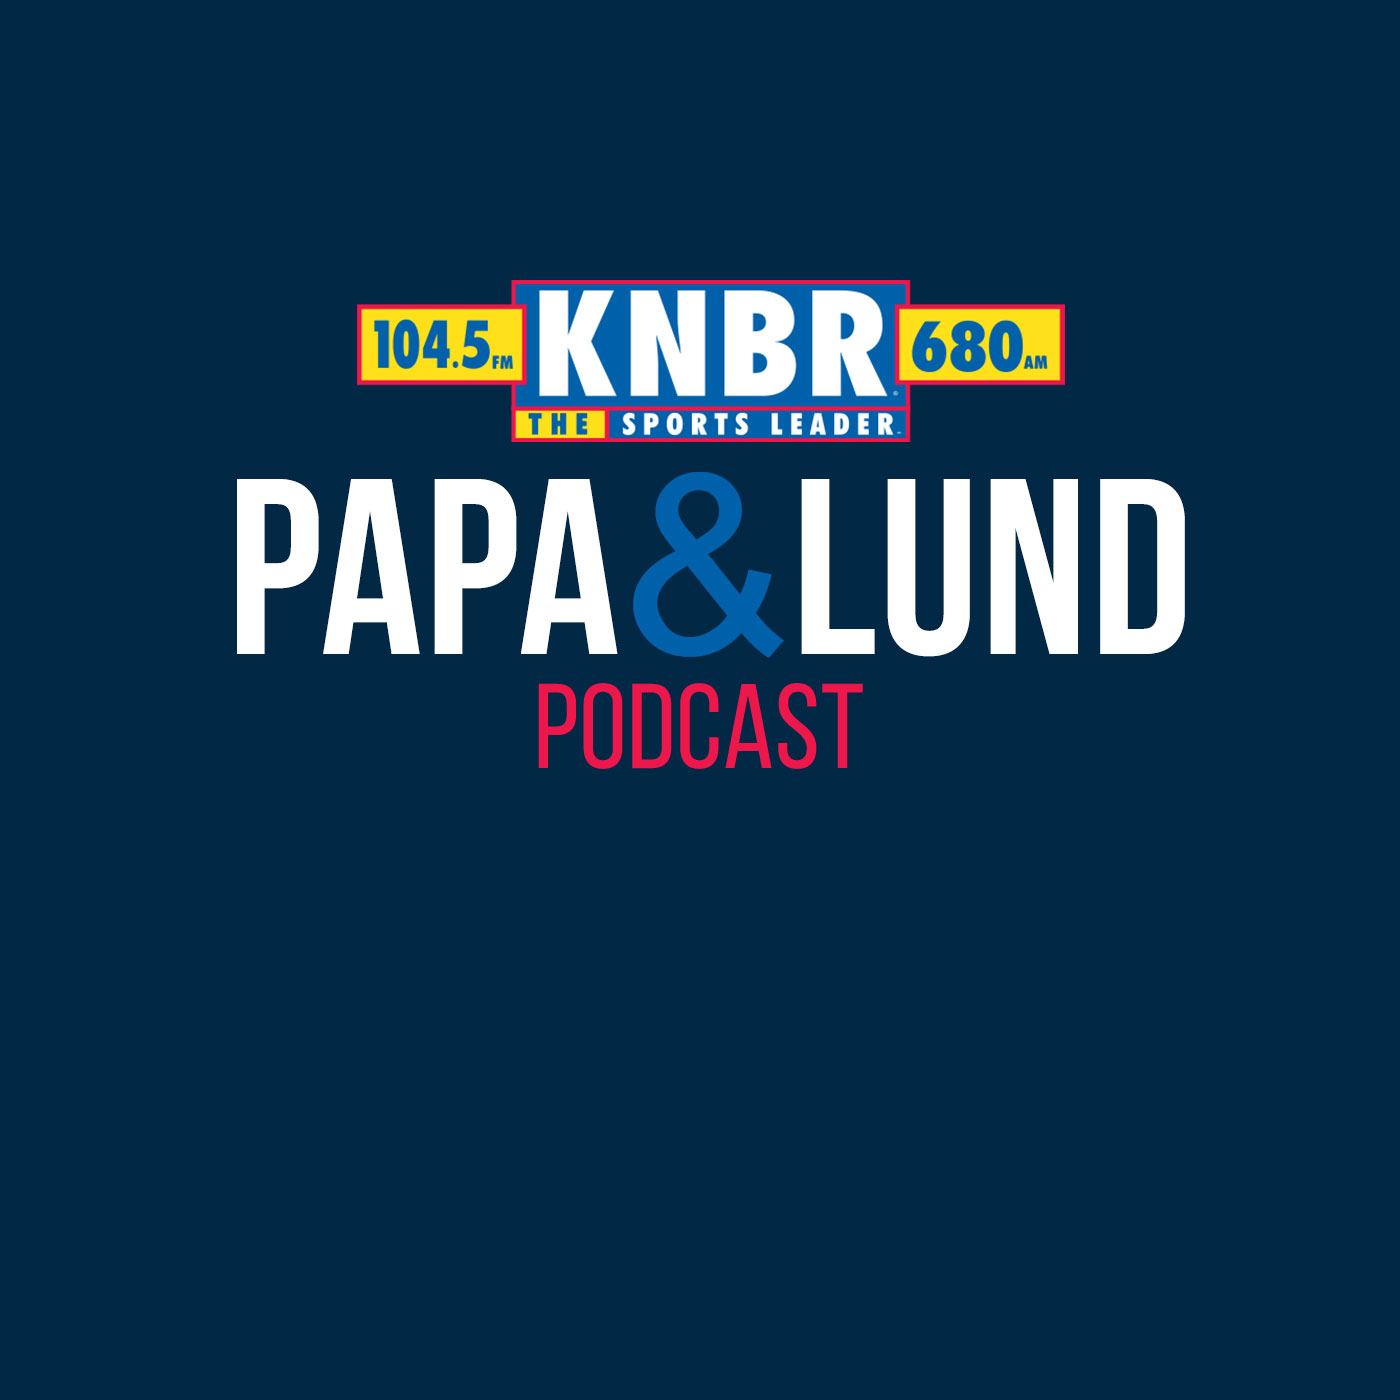 3-29 Chris Haynes recaps the Warriors big come from behind victory over the Pelicans with Papa & Lund